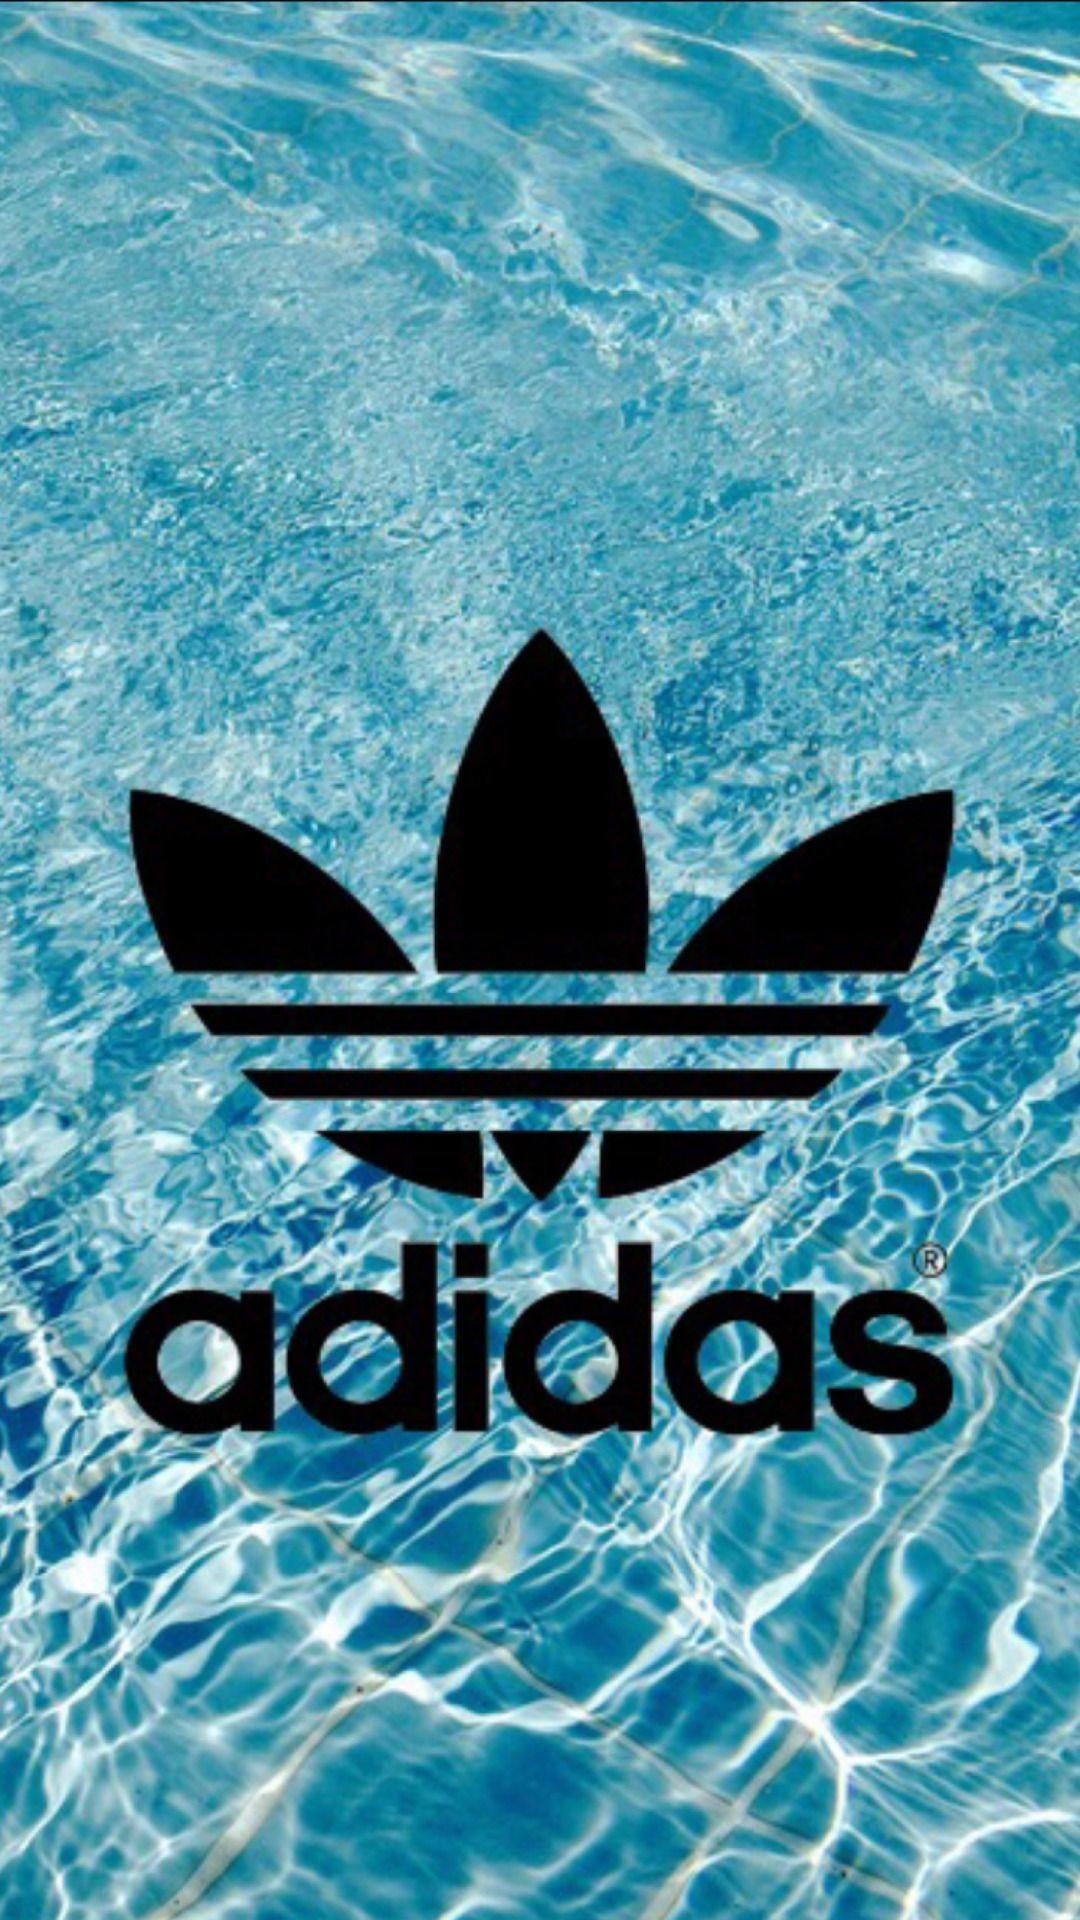 Adidas Iphone Wallpapers Wallpaper Cave